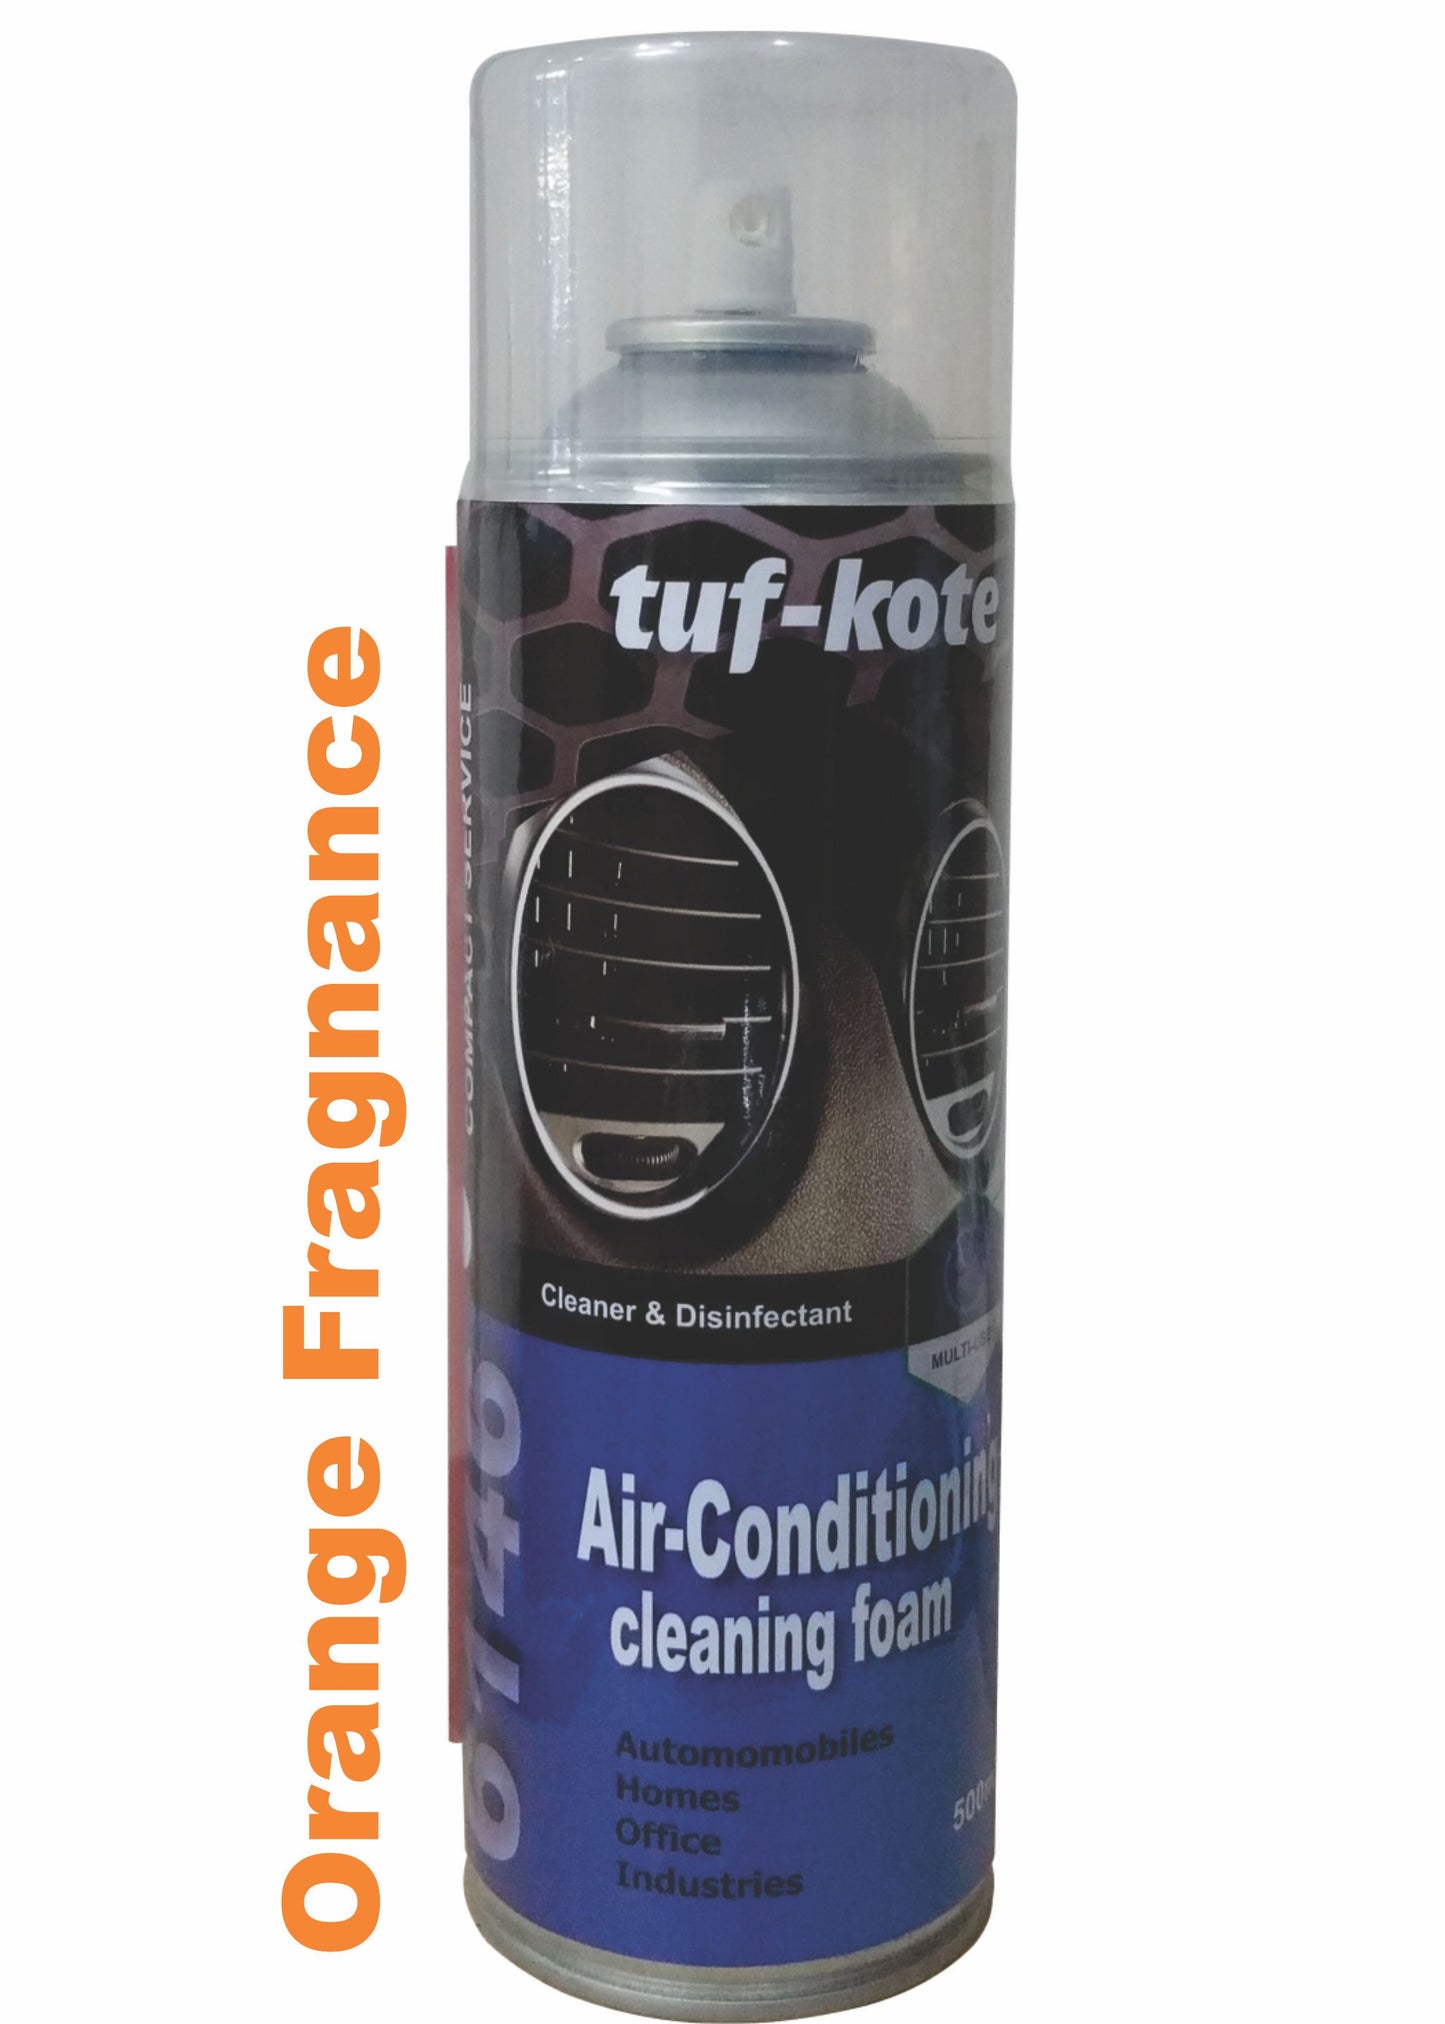 tuf-kote® 6146 Air Conditioner Coil Cleaner and Disinfectant Foam Spray